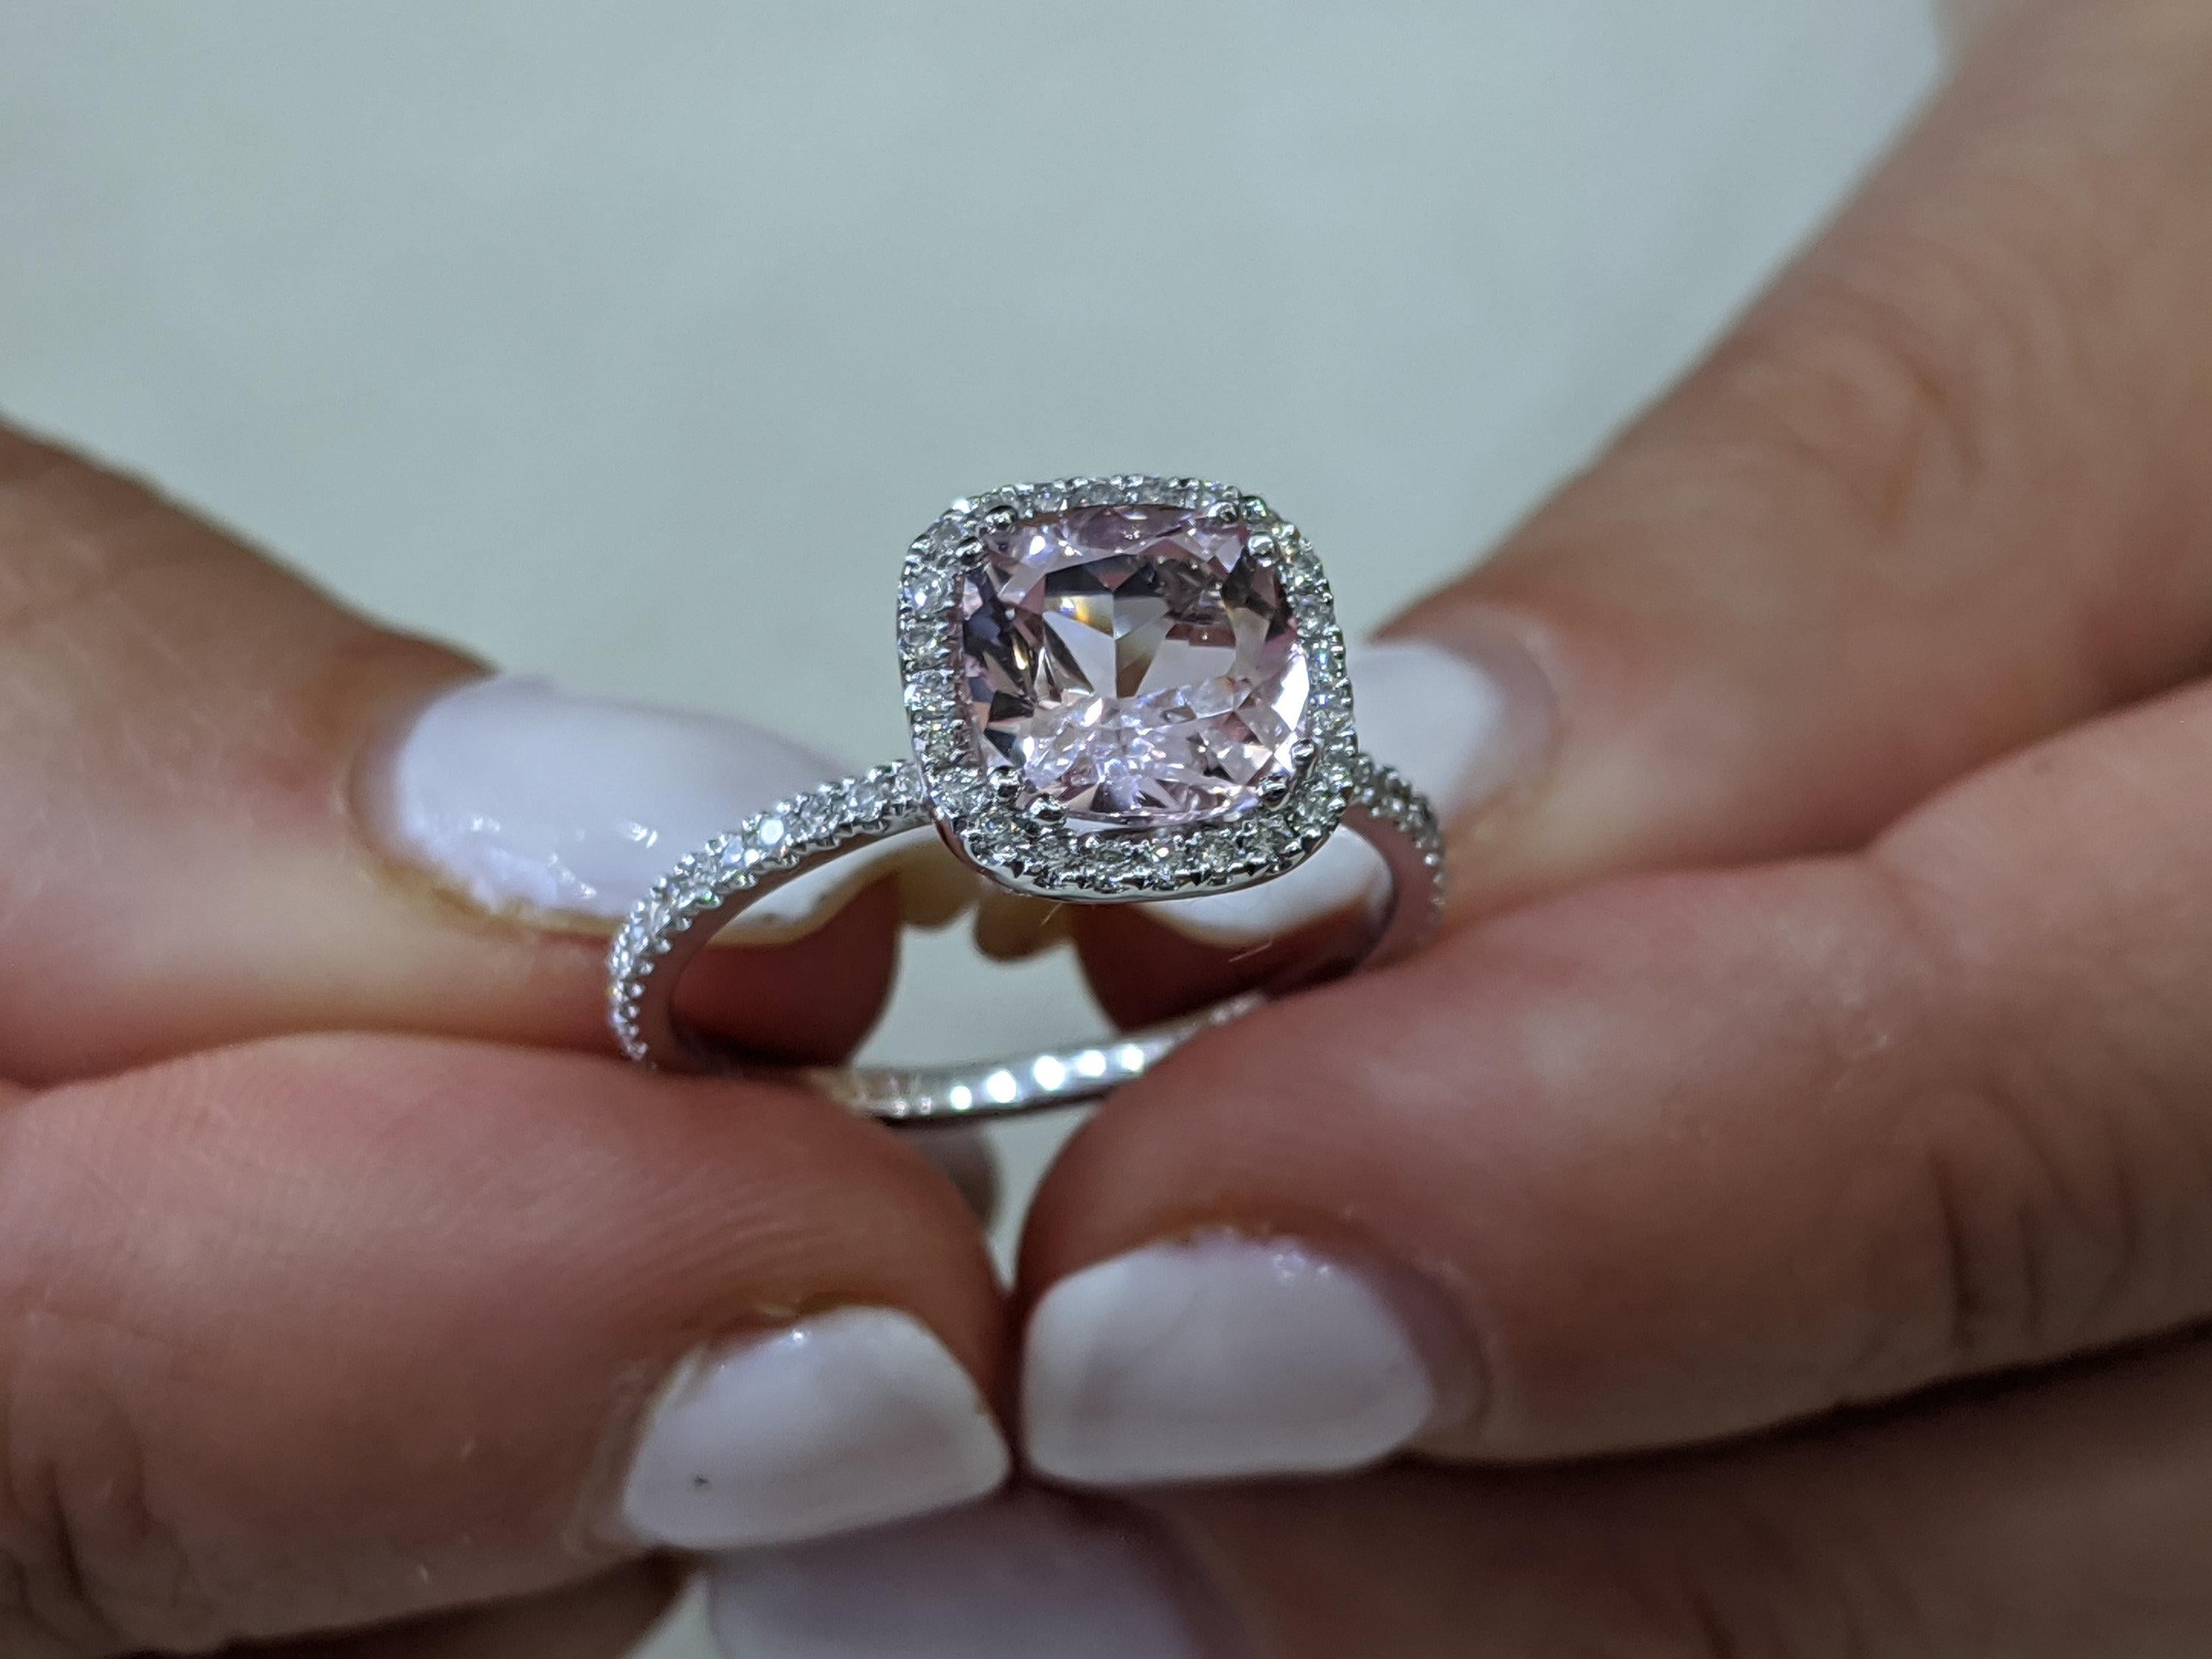 One of a kind 2 Carat Morganite and Diamonds Engagement Ring - An amazing 7.5mm pink/peach natural cushion morganite gemstone, adorned by 1/2ctw of white natural diamonds - this ring is a great diamond alternative ring that will draw attention